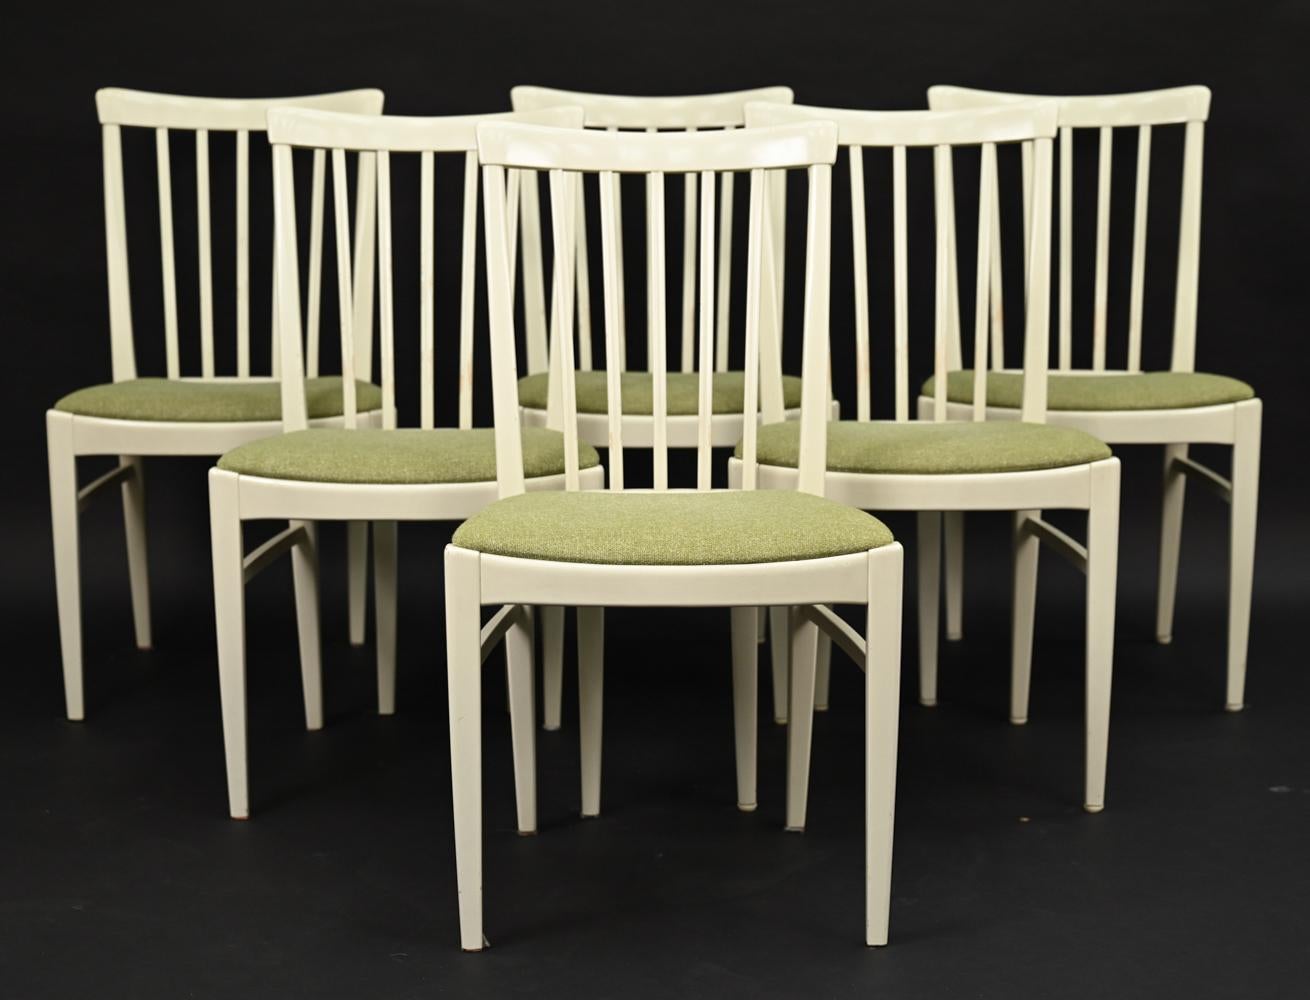 An elegant Swedish mid-century dining suite in the Gustavian style, in off-white painted beech wood. Comprised of a tall cabinet with interior fitted with shelving, (6) spindle back dining chairs with green wool seats, and dining table with leaf